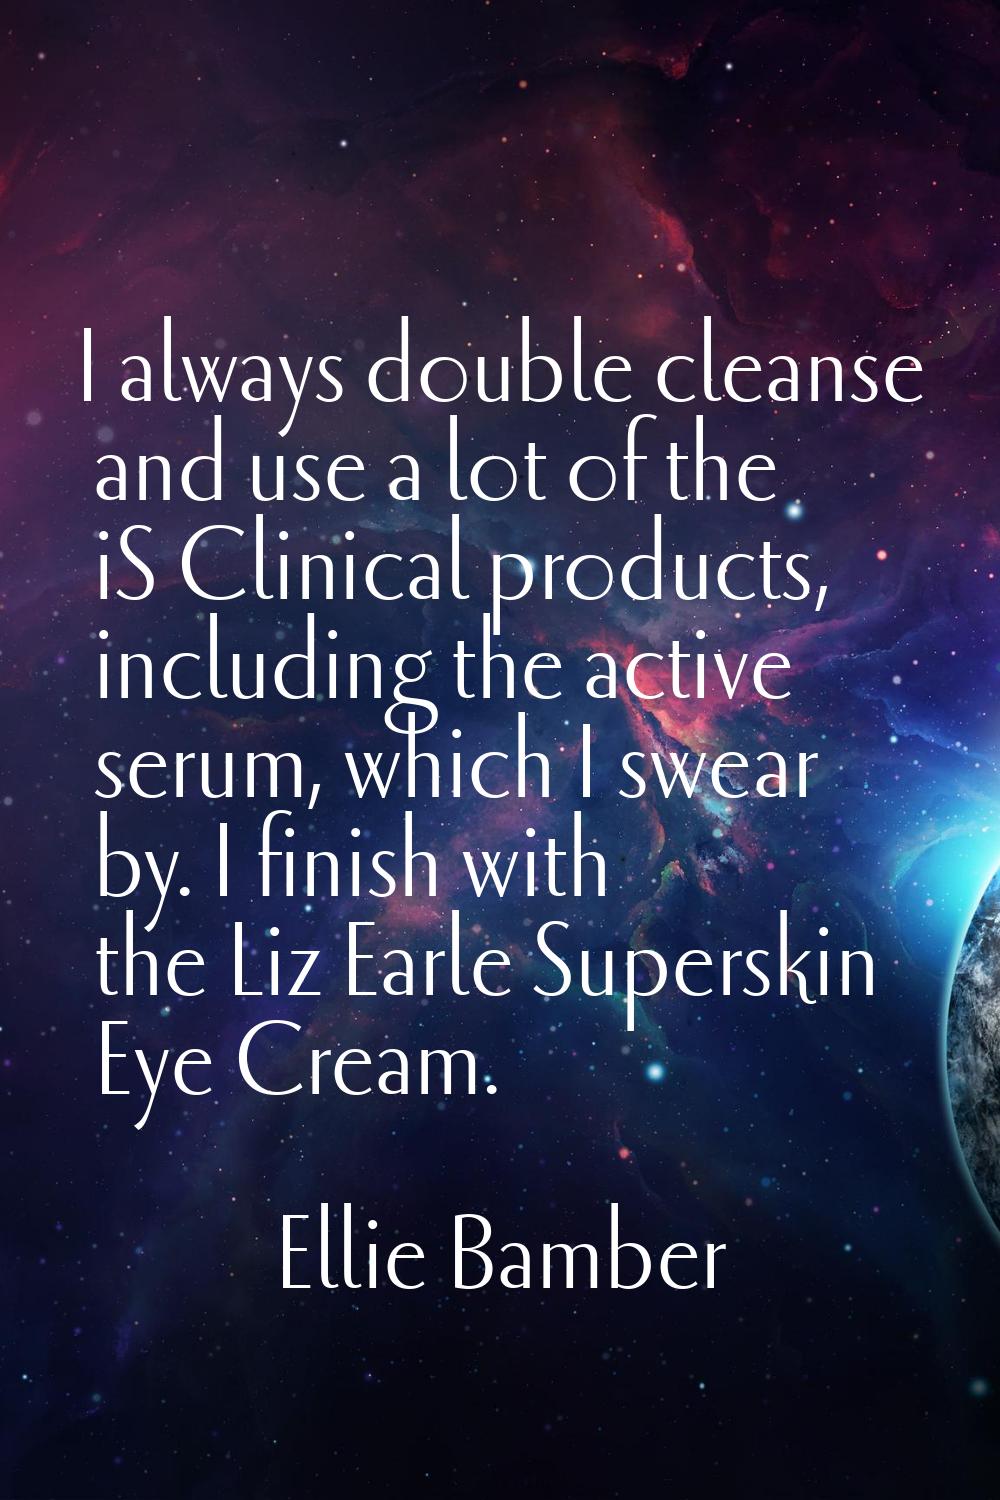 I always double cleanse and use a lot of the iS Clinical products, including the active serum, whic